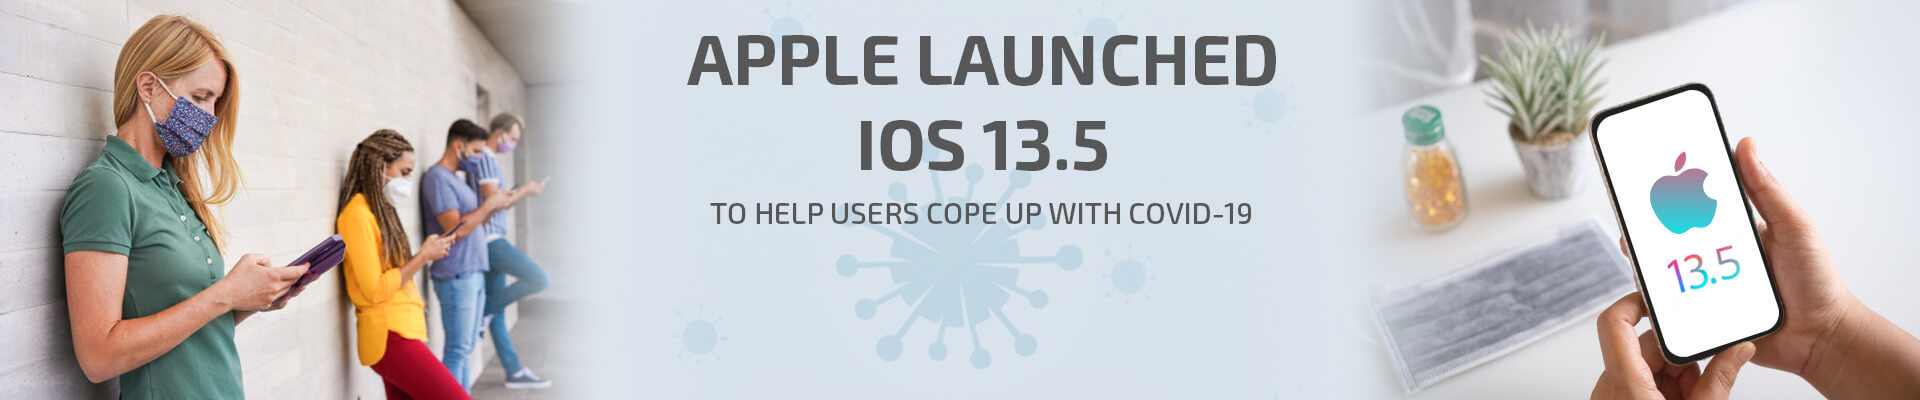 Apple Launched IOS 13.5 to Help Users Cope up With Covid-19